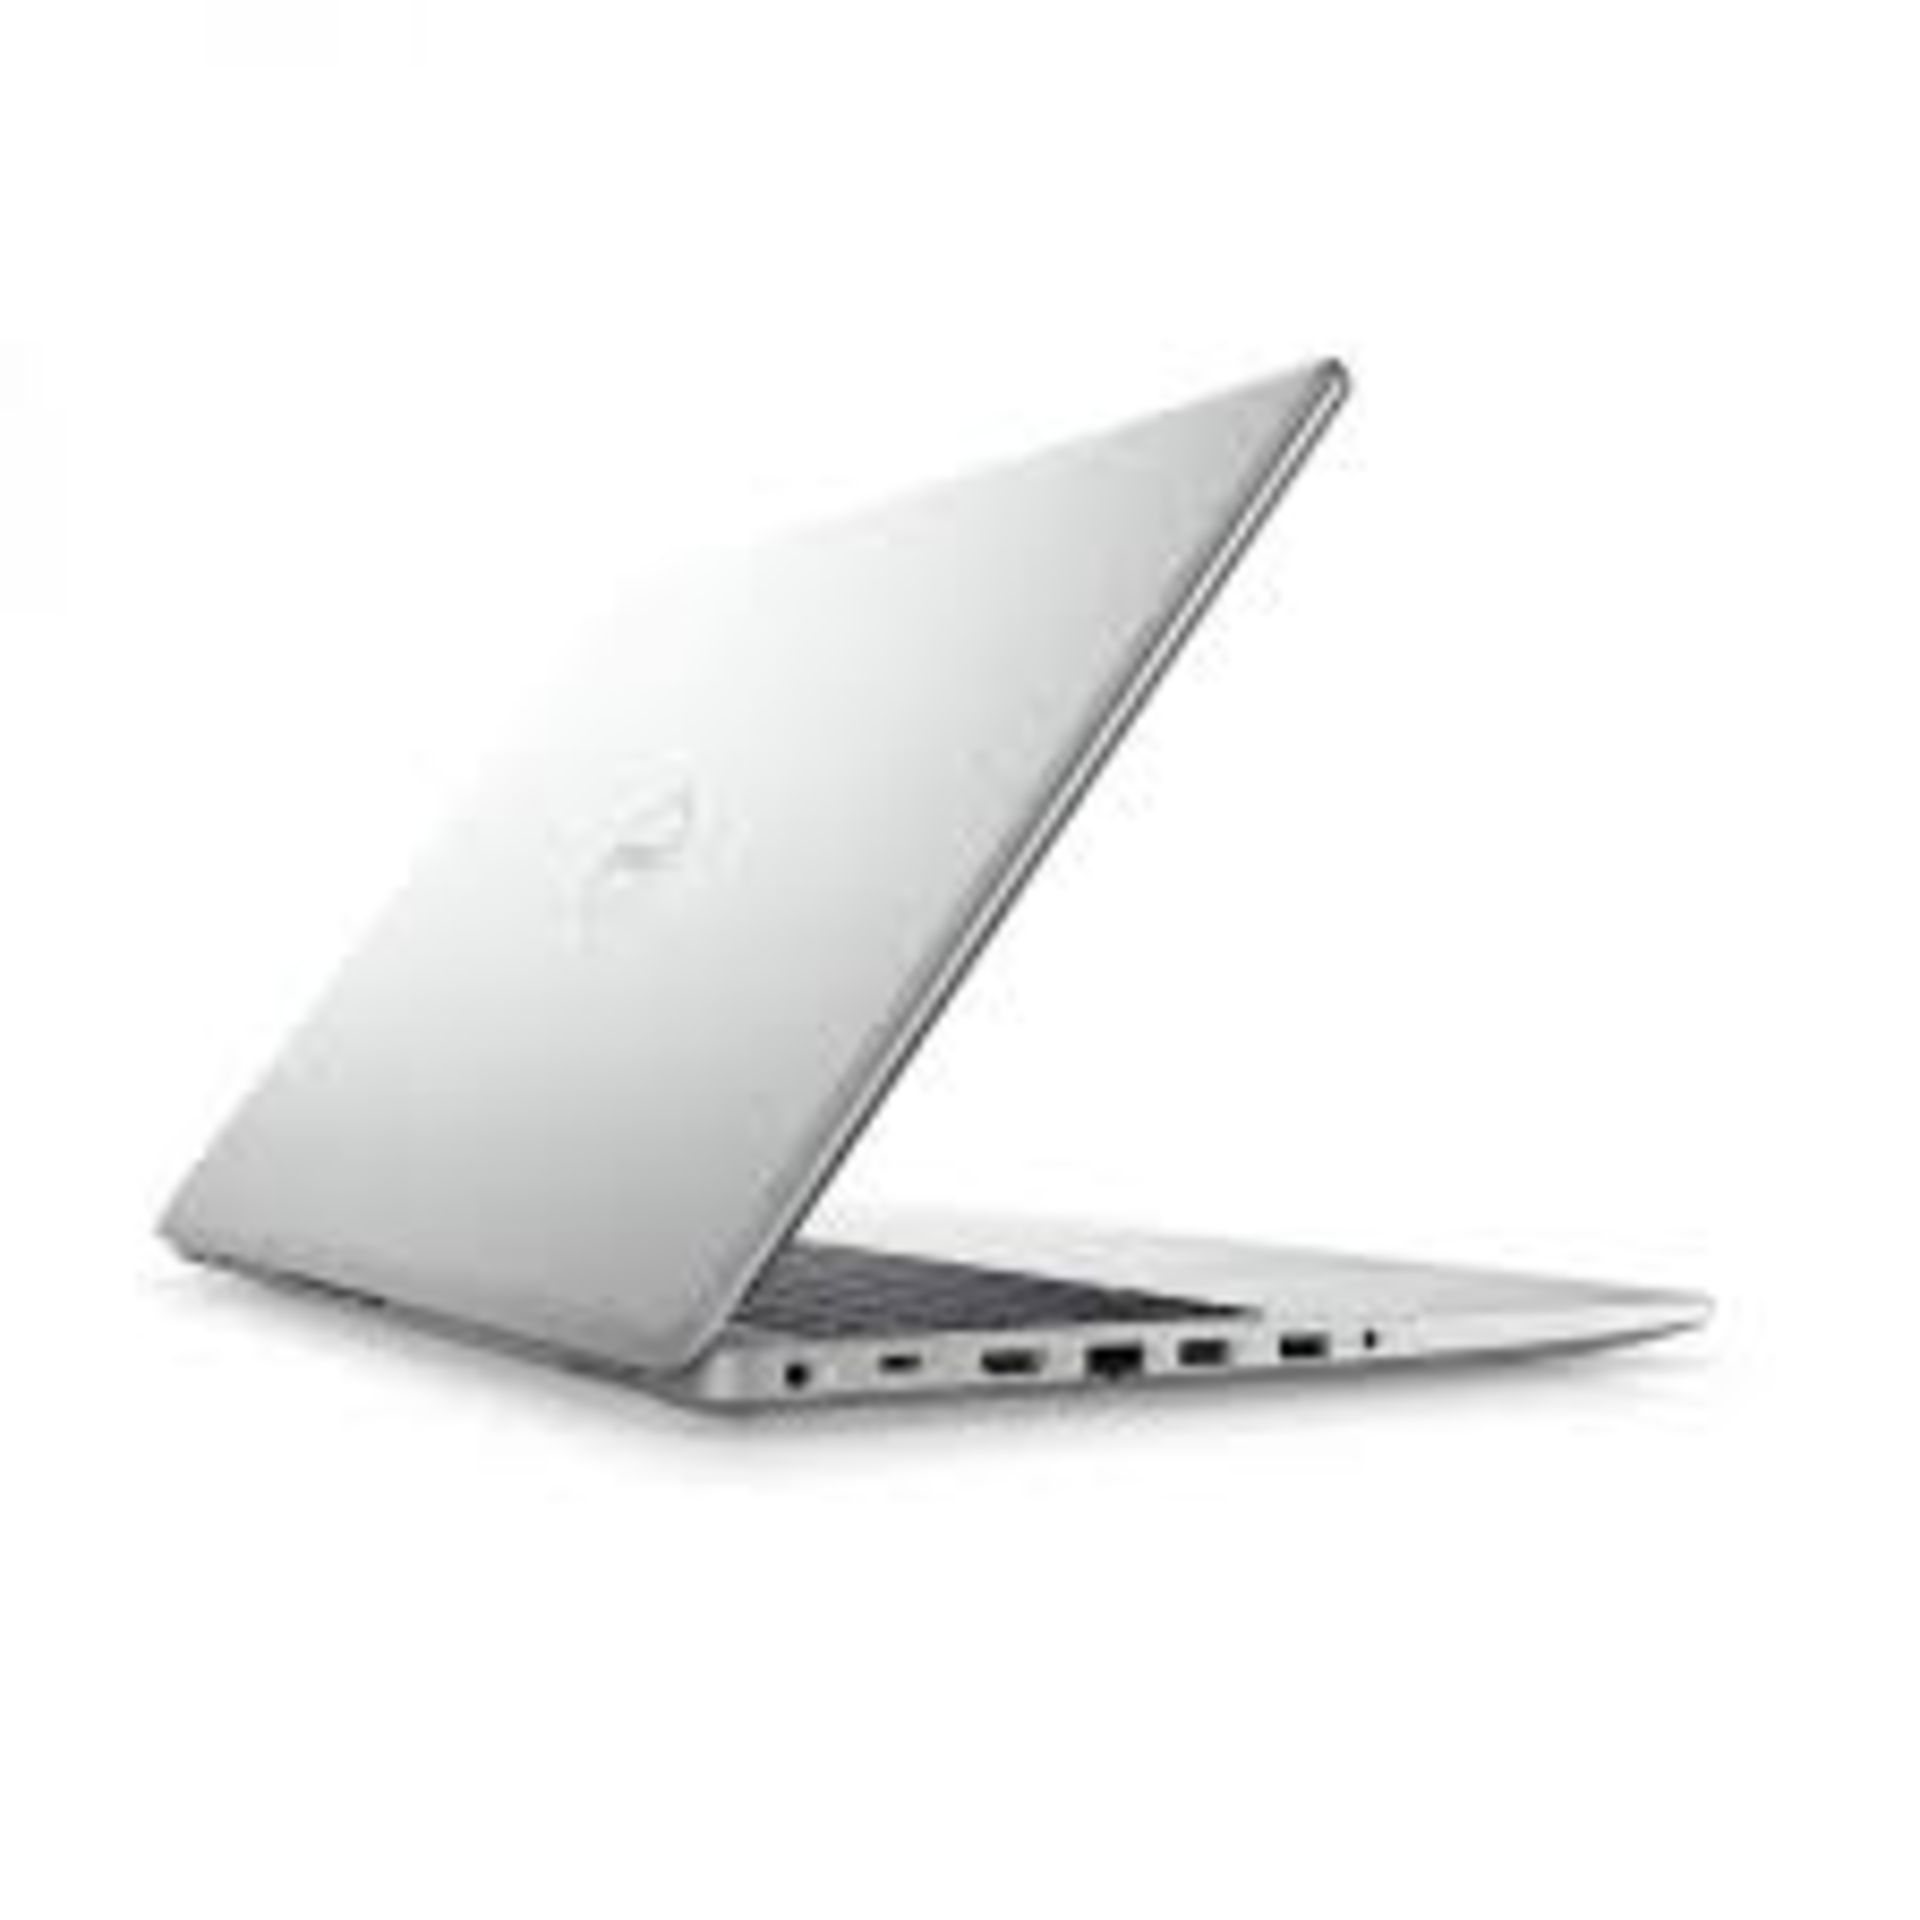 1 x Dell Inspiron 15 5593 Laptop Featuring a 10th Gen Core i5-1035G1 3.6ghz Quad Core Processor, - Image 3 of 18